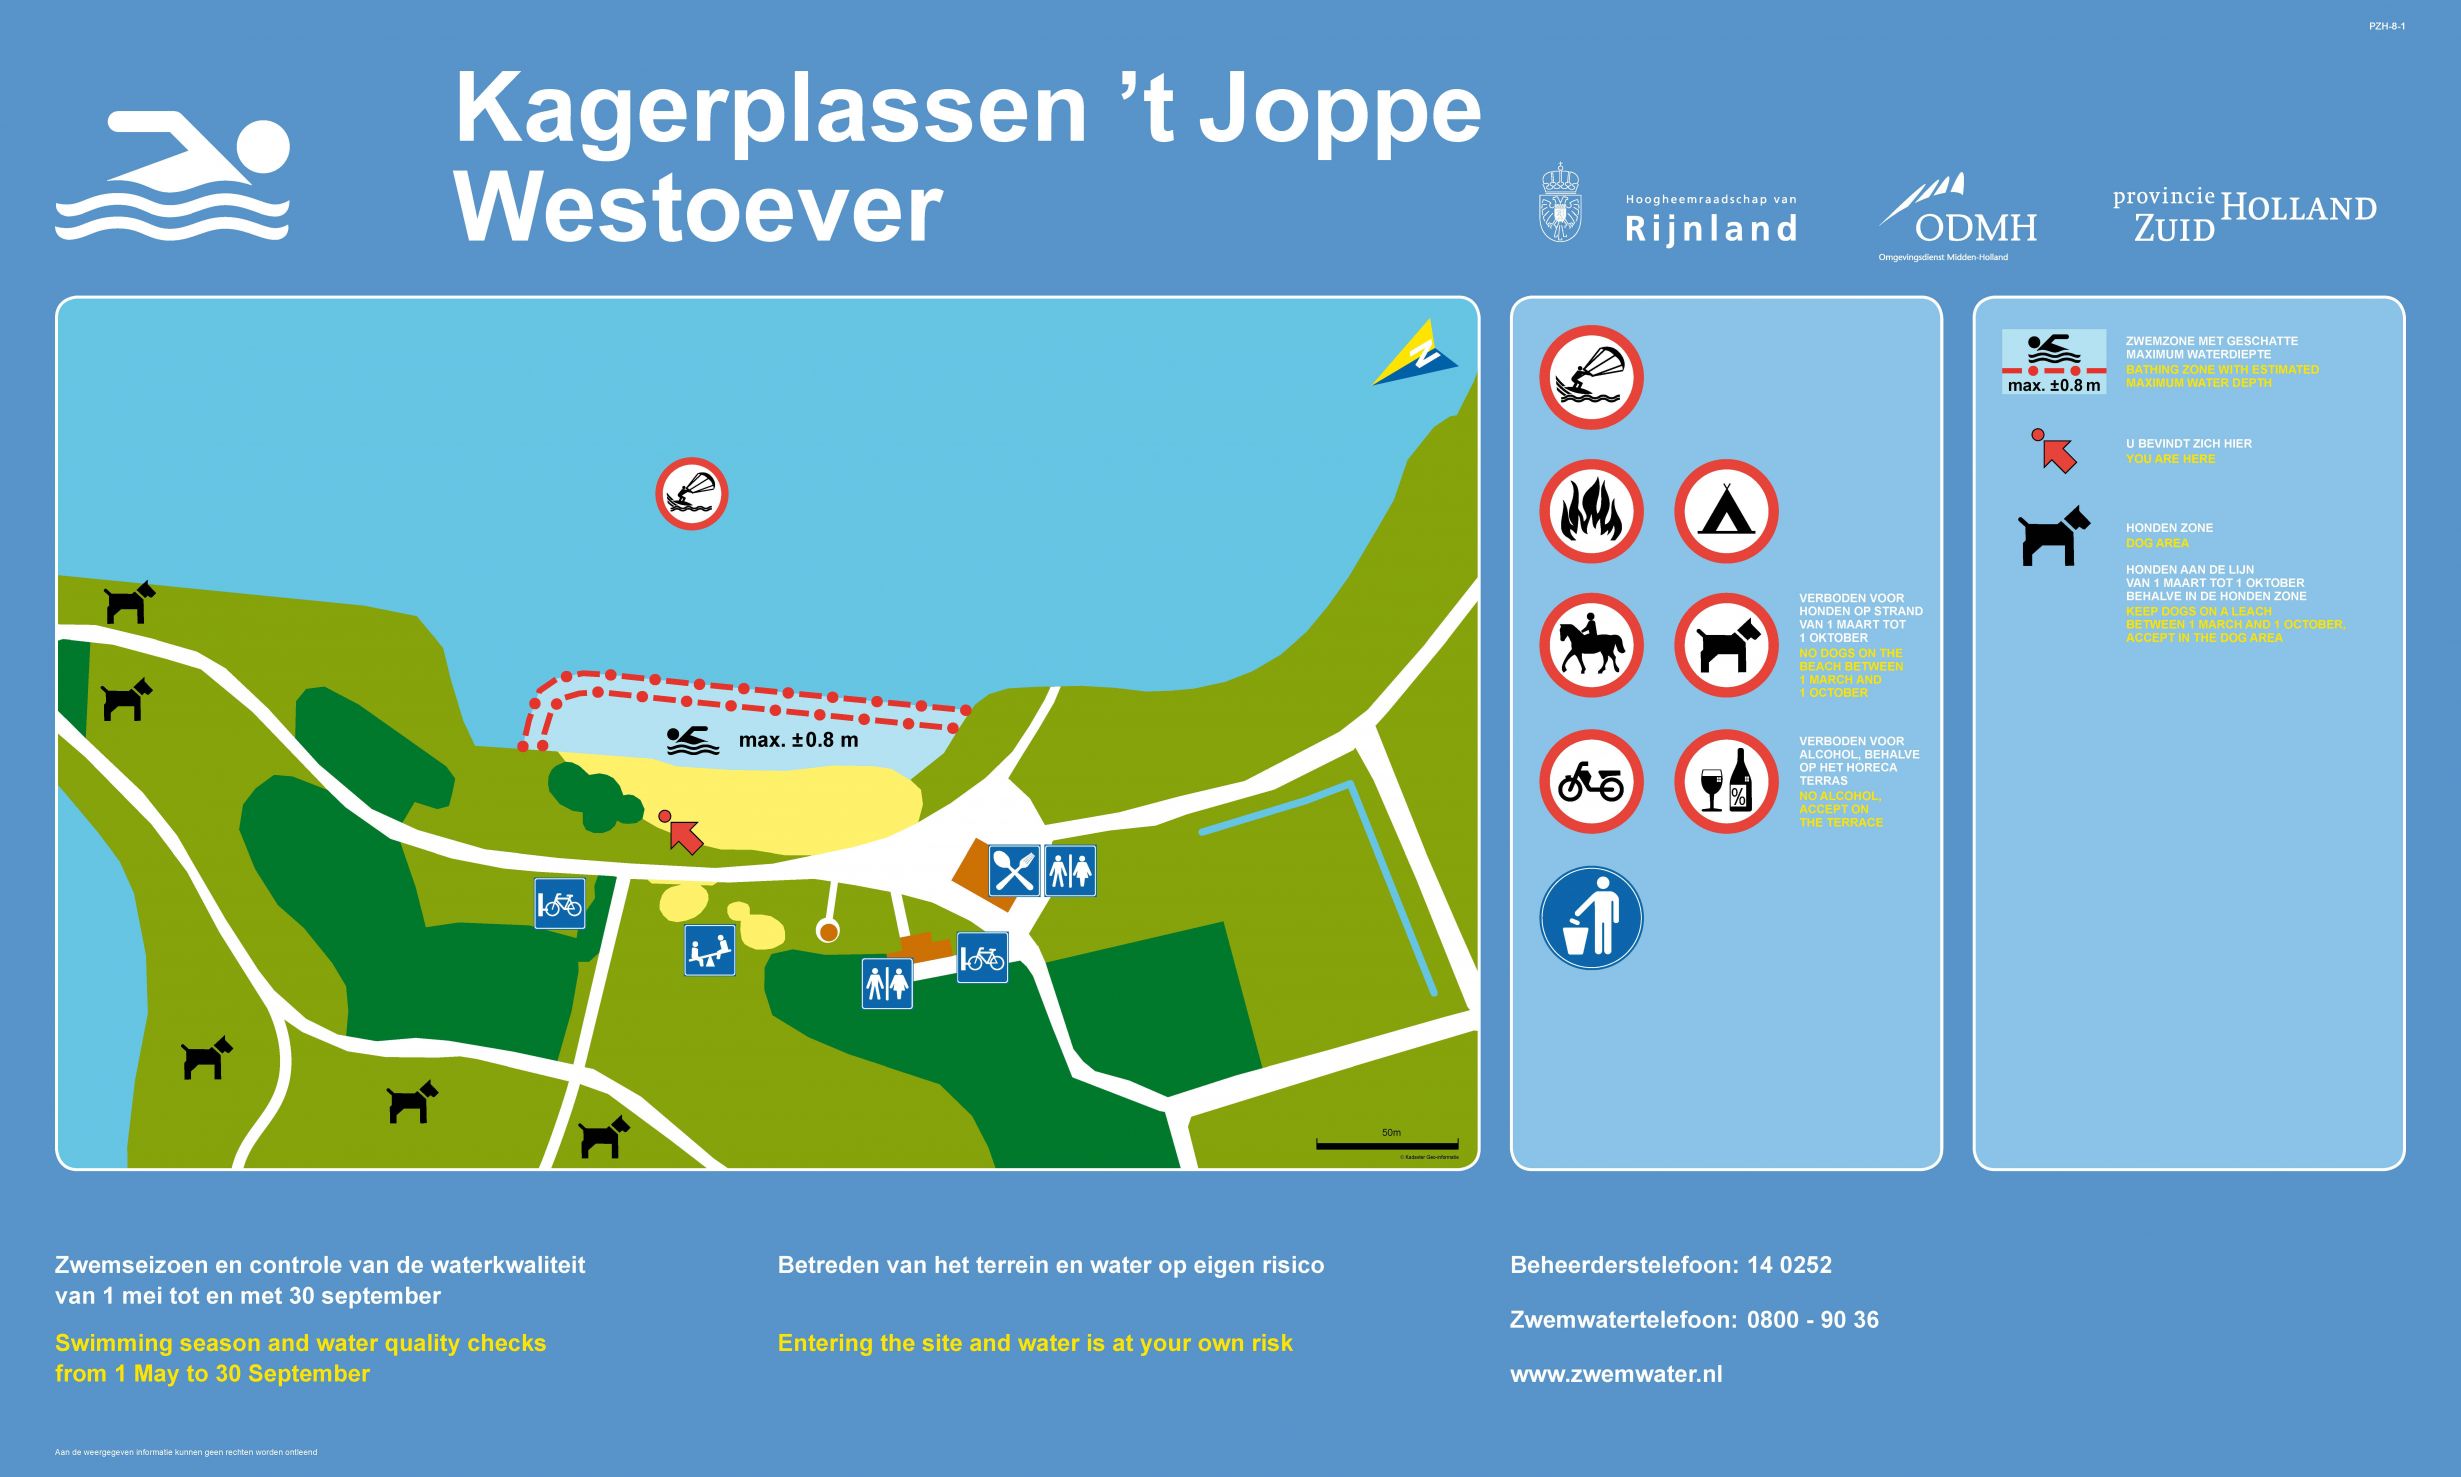 The information board at the swimming location Kagerplassen 't Joppe Westoever